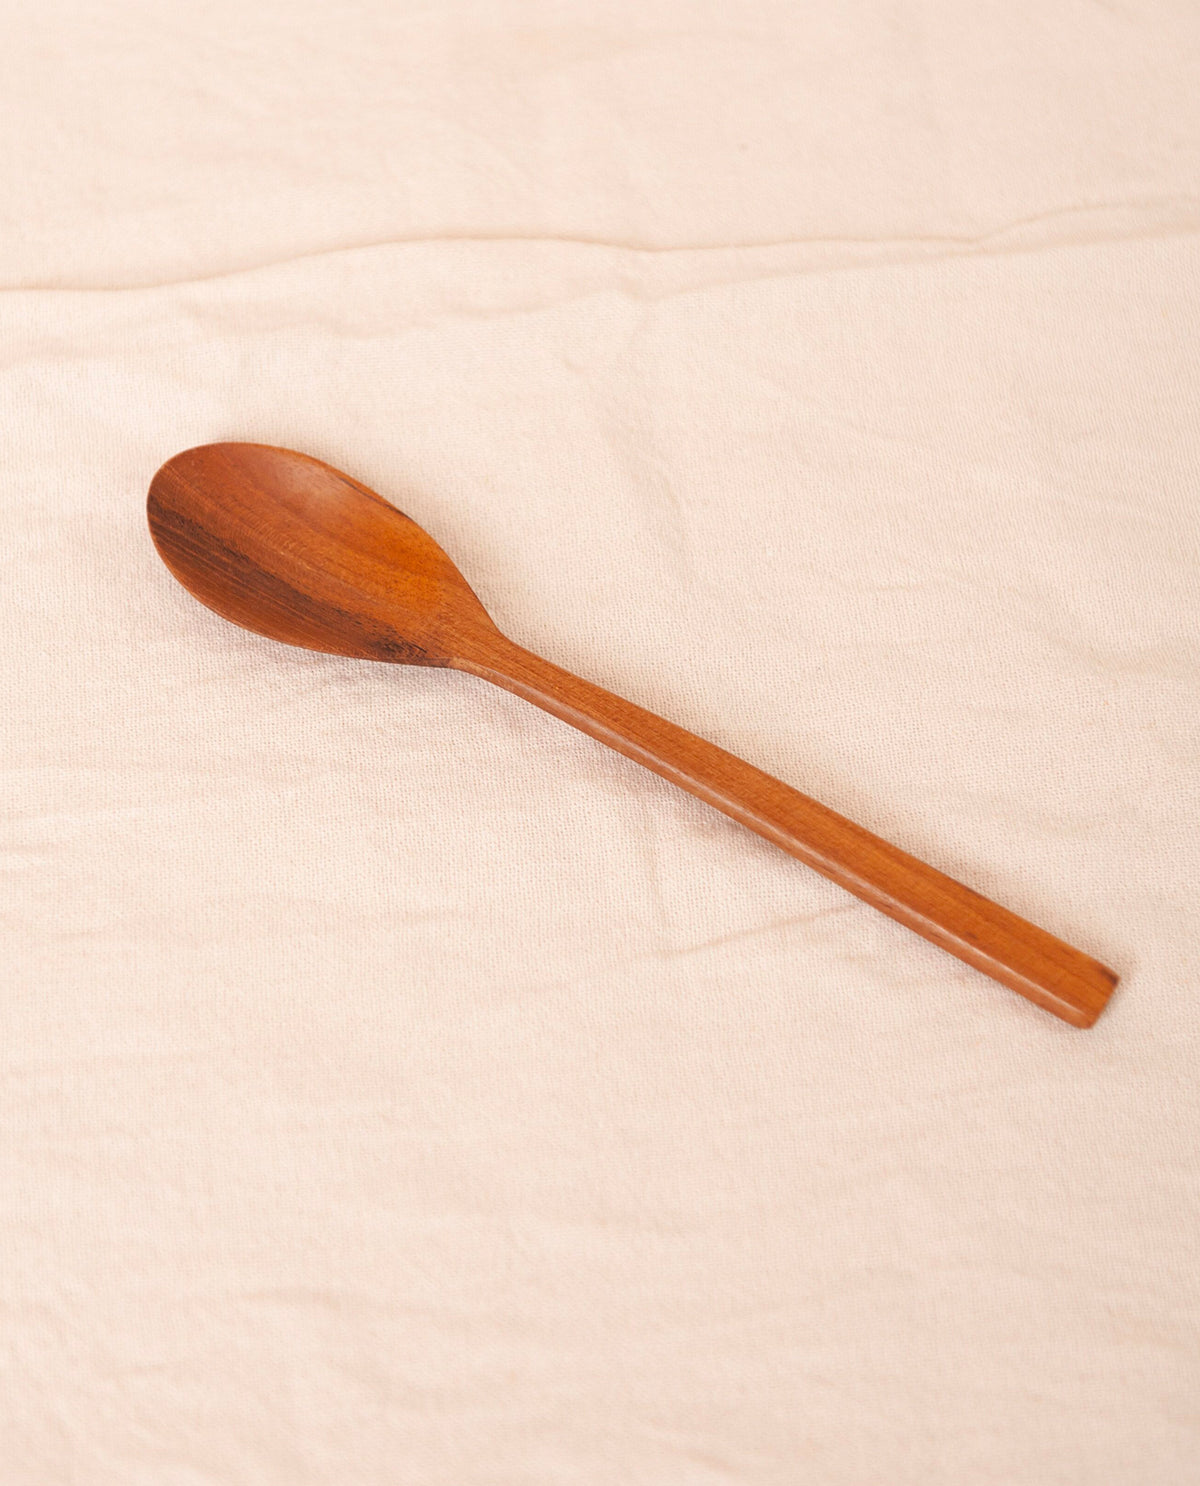 Talasnal Wooden Measuring Spoon in Natural